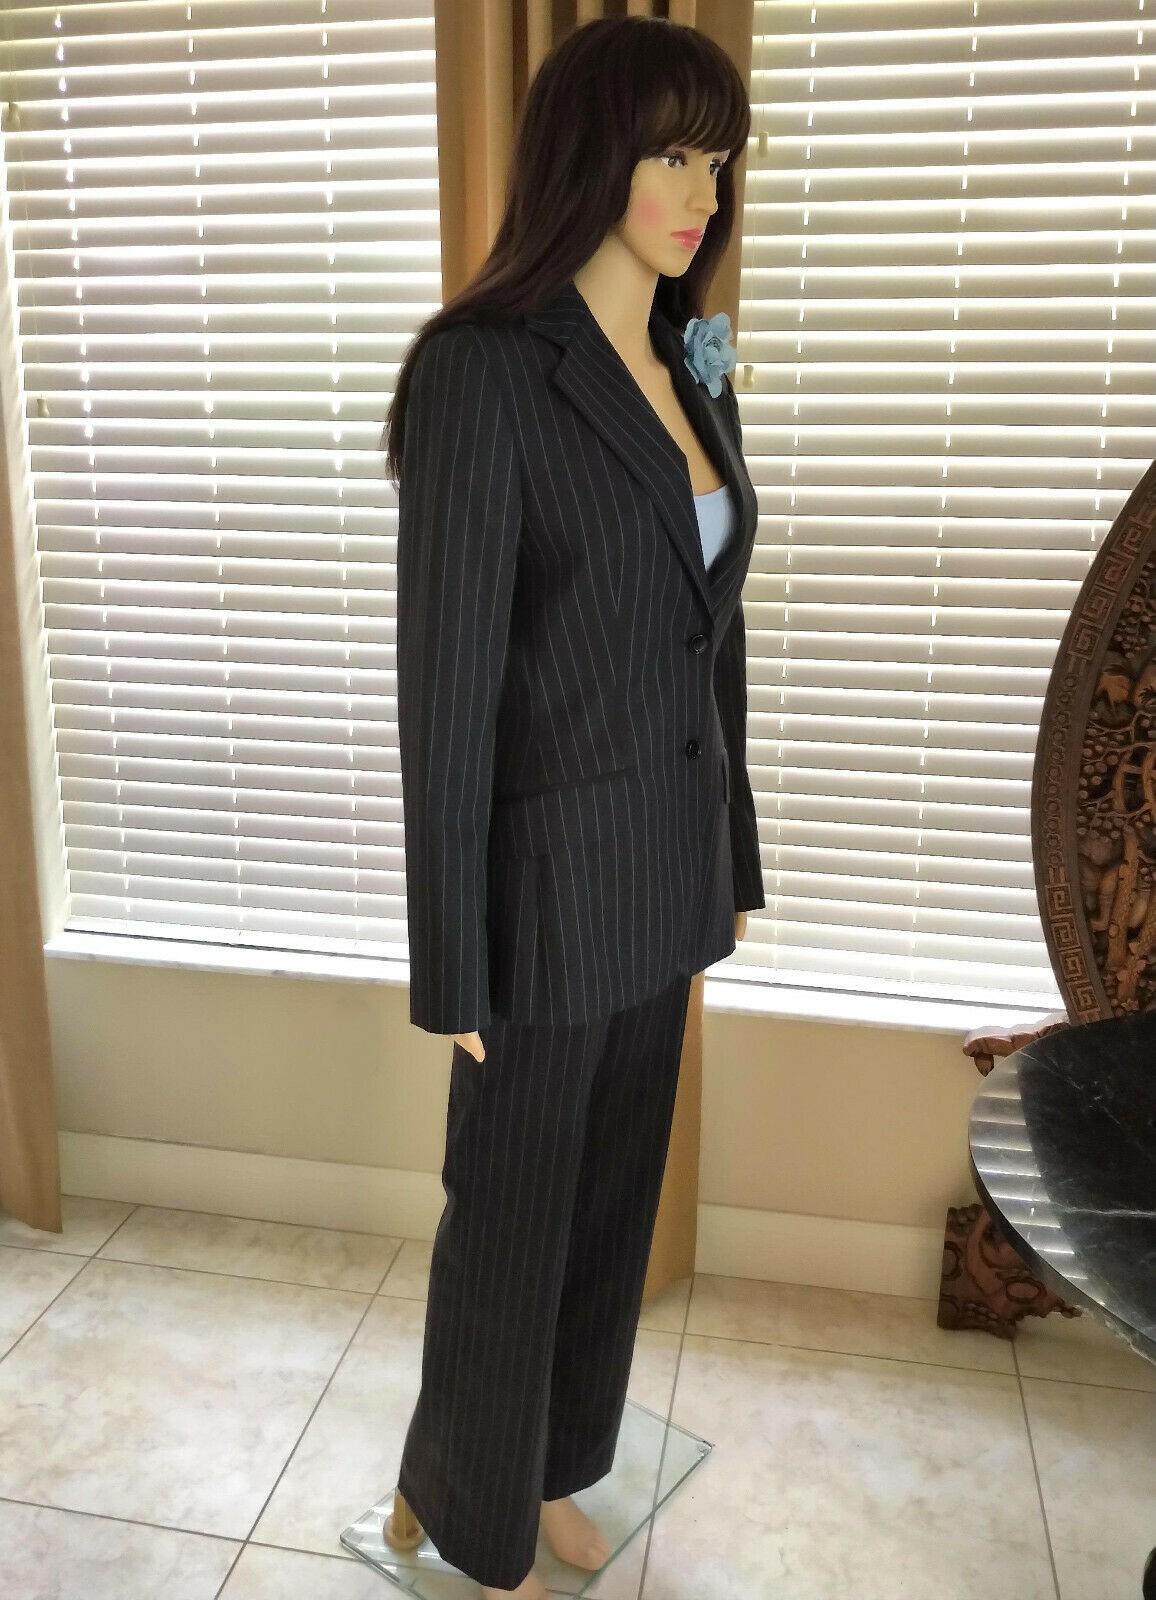 Dolce & Gabbana Charcoal Black & Sky Blue Pinstripe Jacket Pant Suit IT 40/ US 4 In Excellent Condition For Sale In Ormond Beach, FL